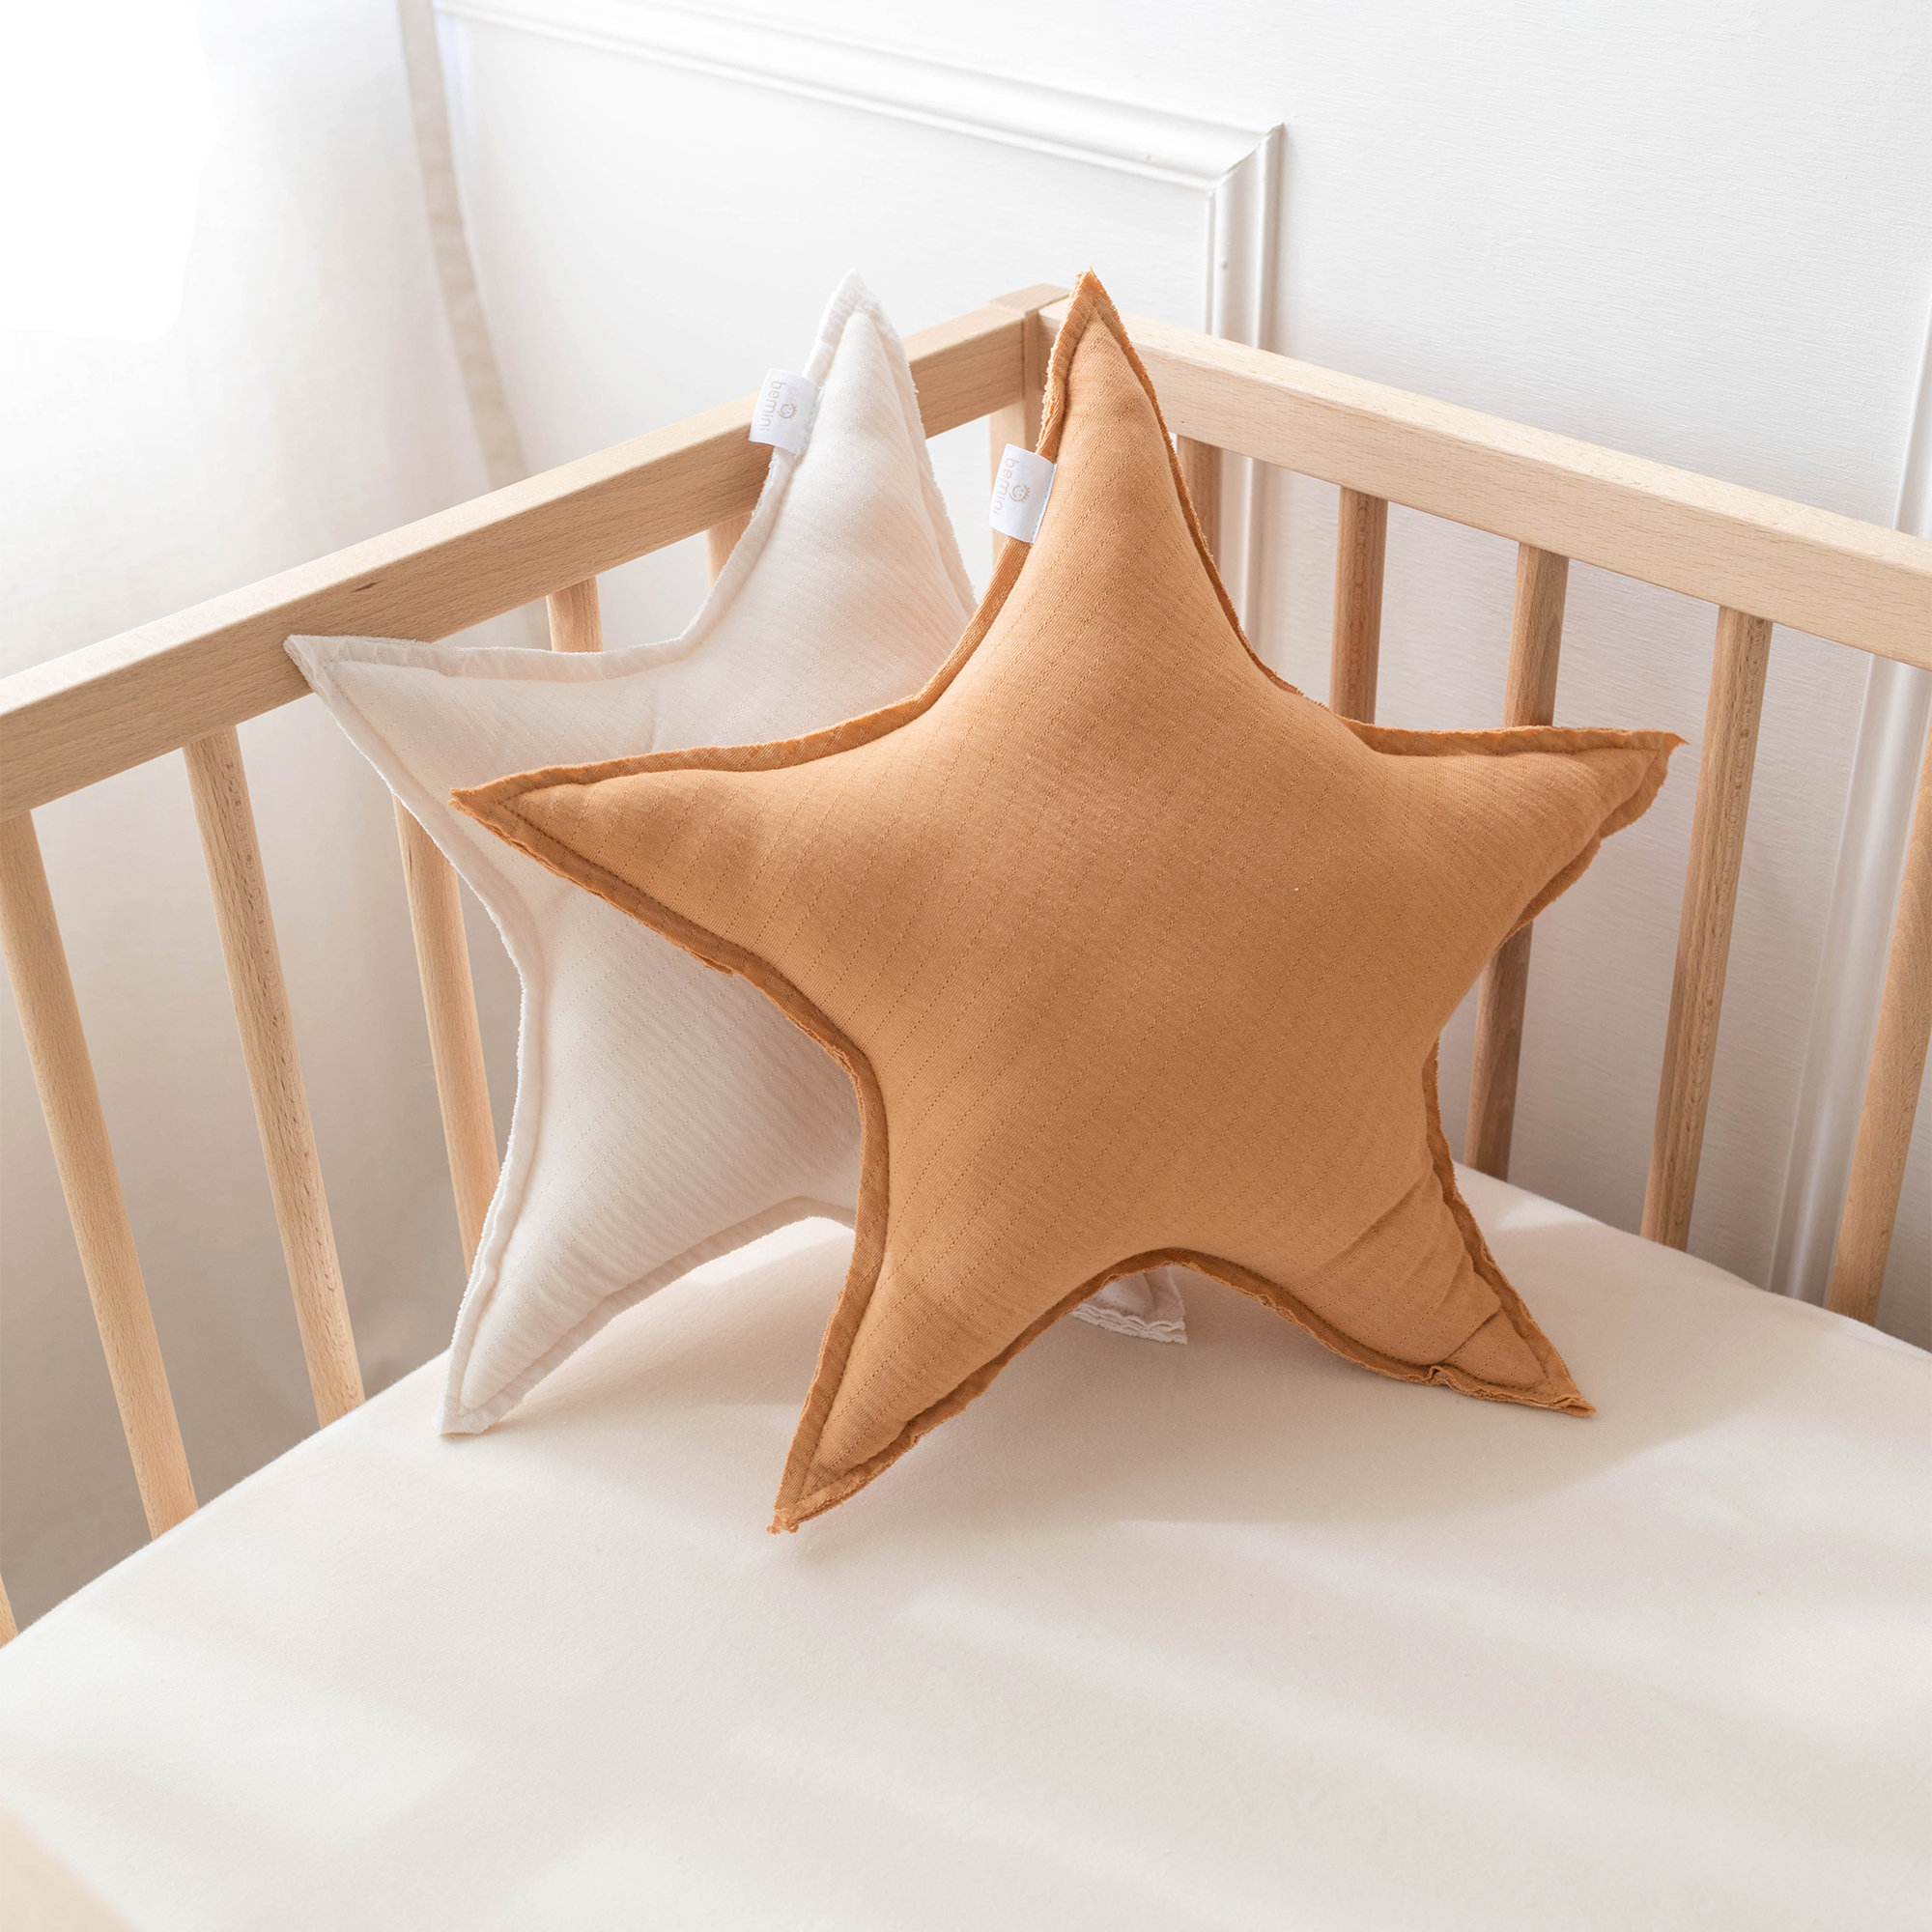 Decorative cushion Tetra Jersey 30cm STARY Biscuit[BEDDING]